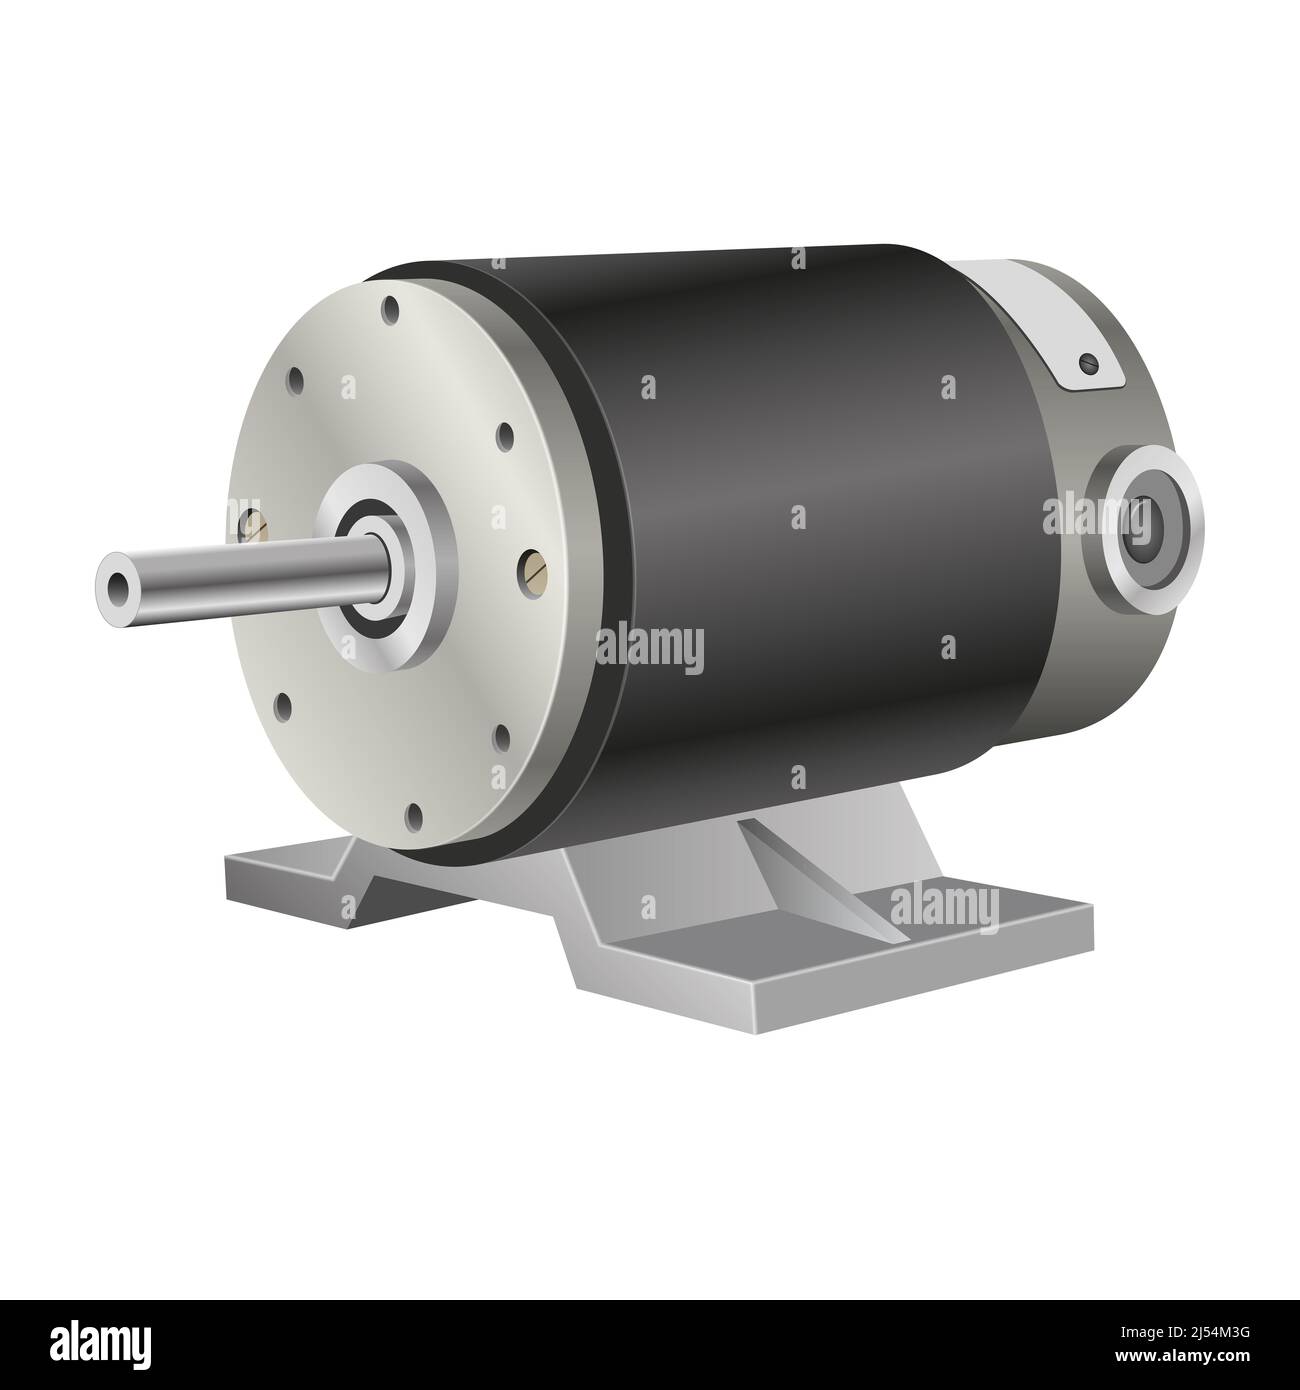 Illustration of the electric motor  side view Stock Photo